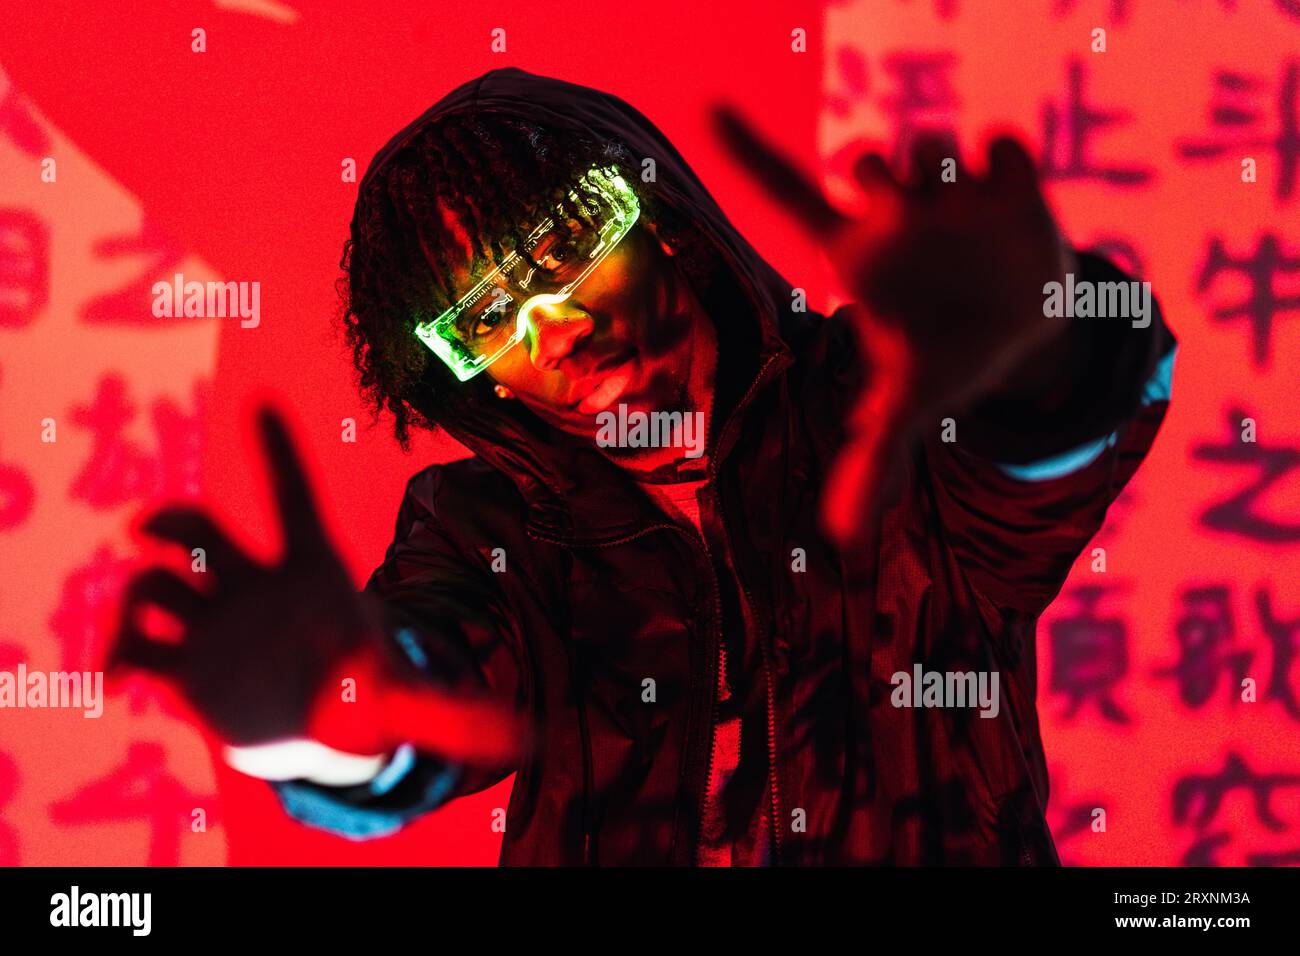 Studio portrait with red neon lights of a futuristic man wearing smart glasses gesturing and looking at camera Stock Photo